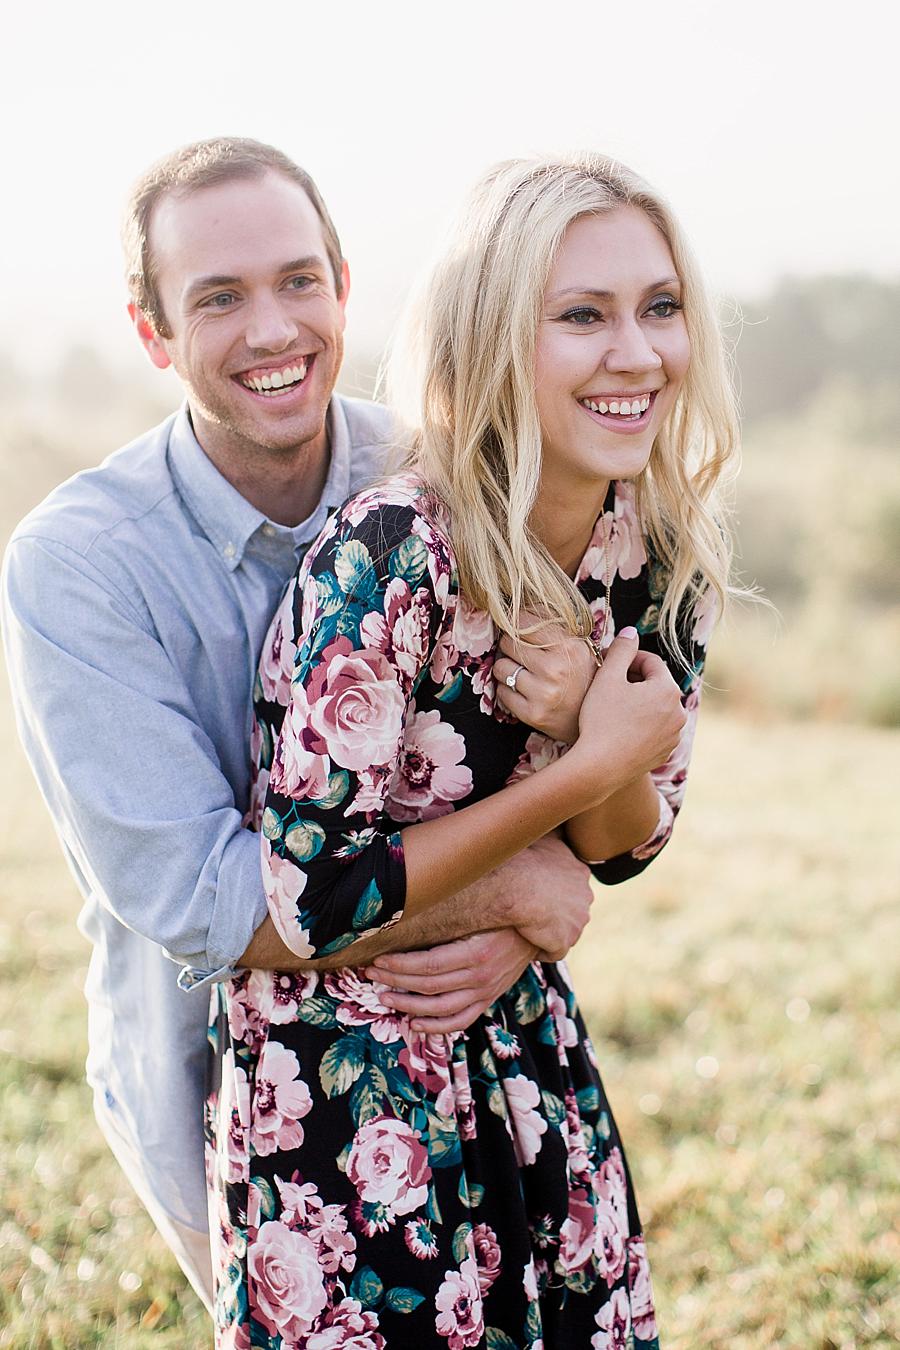 Big smiles at this Family Farm Engagement Session by Knoxville Wedding Photographer, Amanda May Photos.